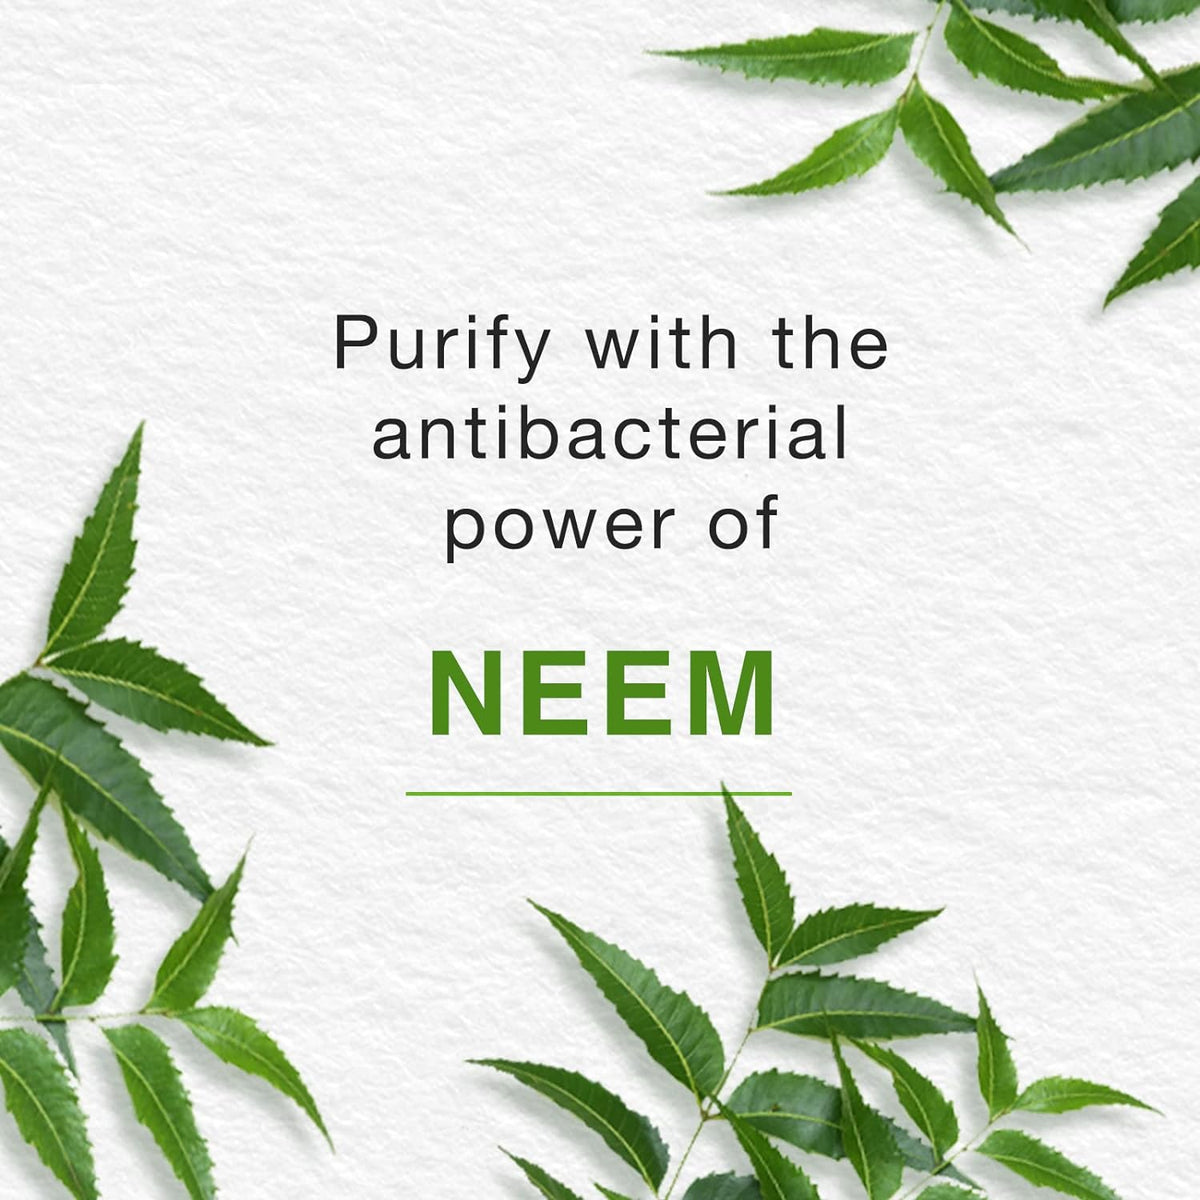 Himalaya Purifying Neem Face Wash Give You Clear, Problem-Free Skin Without Over-Drying Skin -50ml